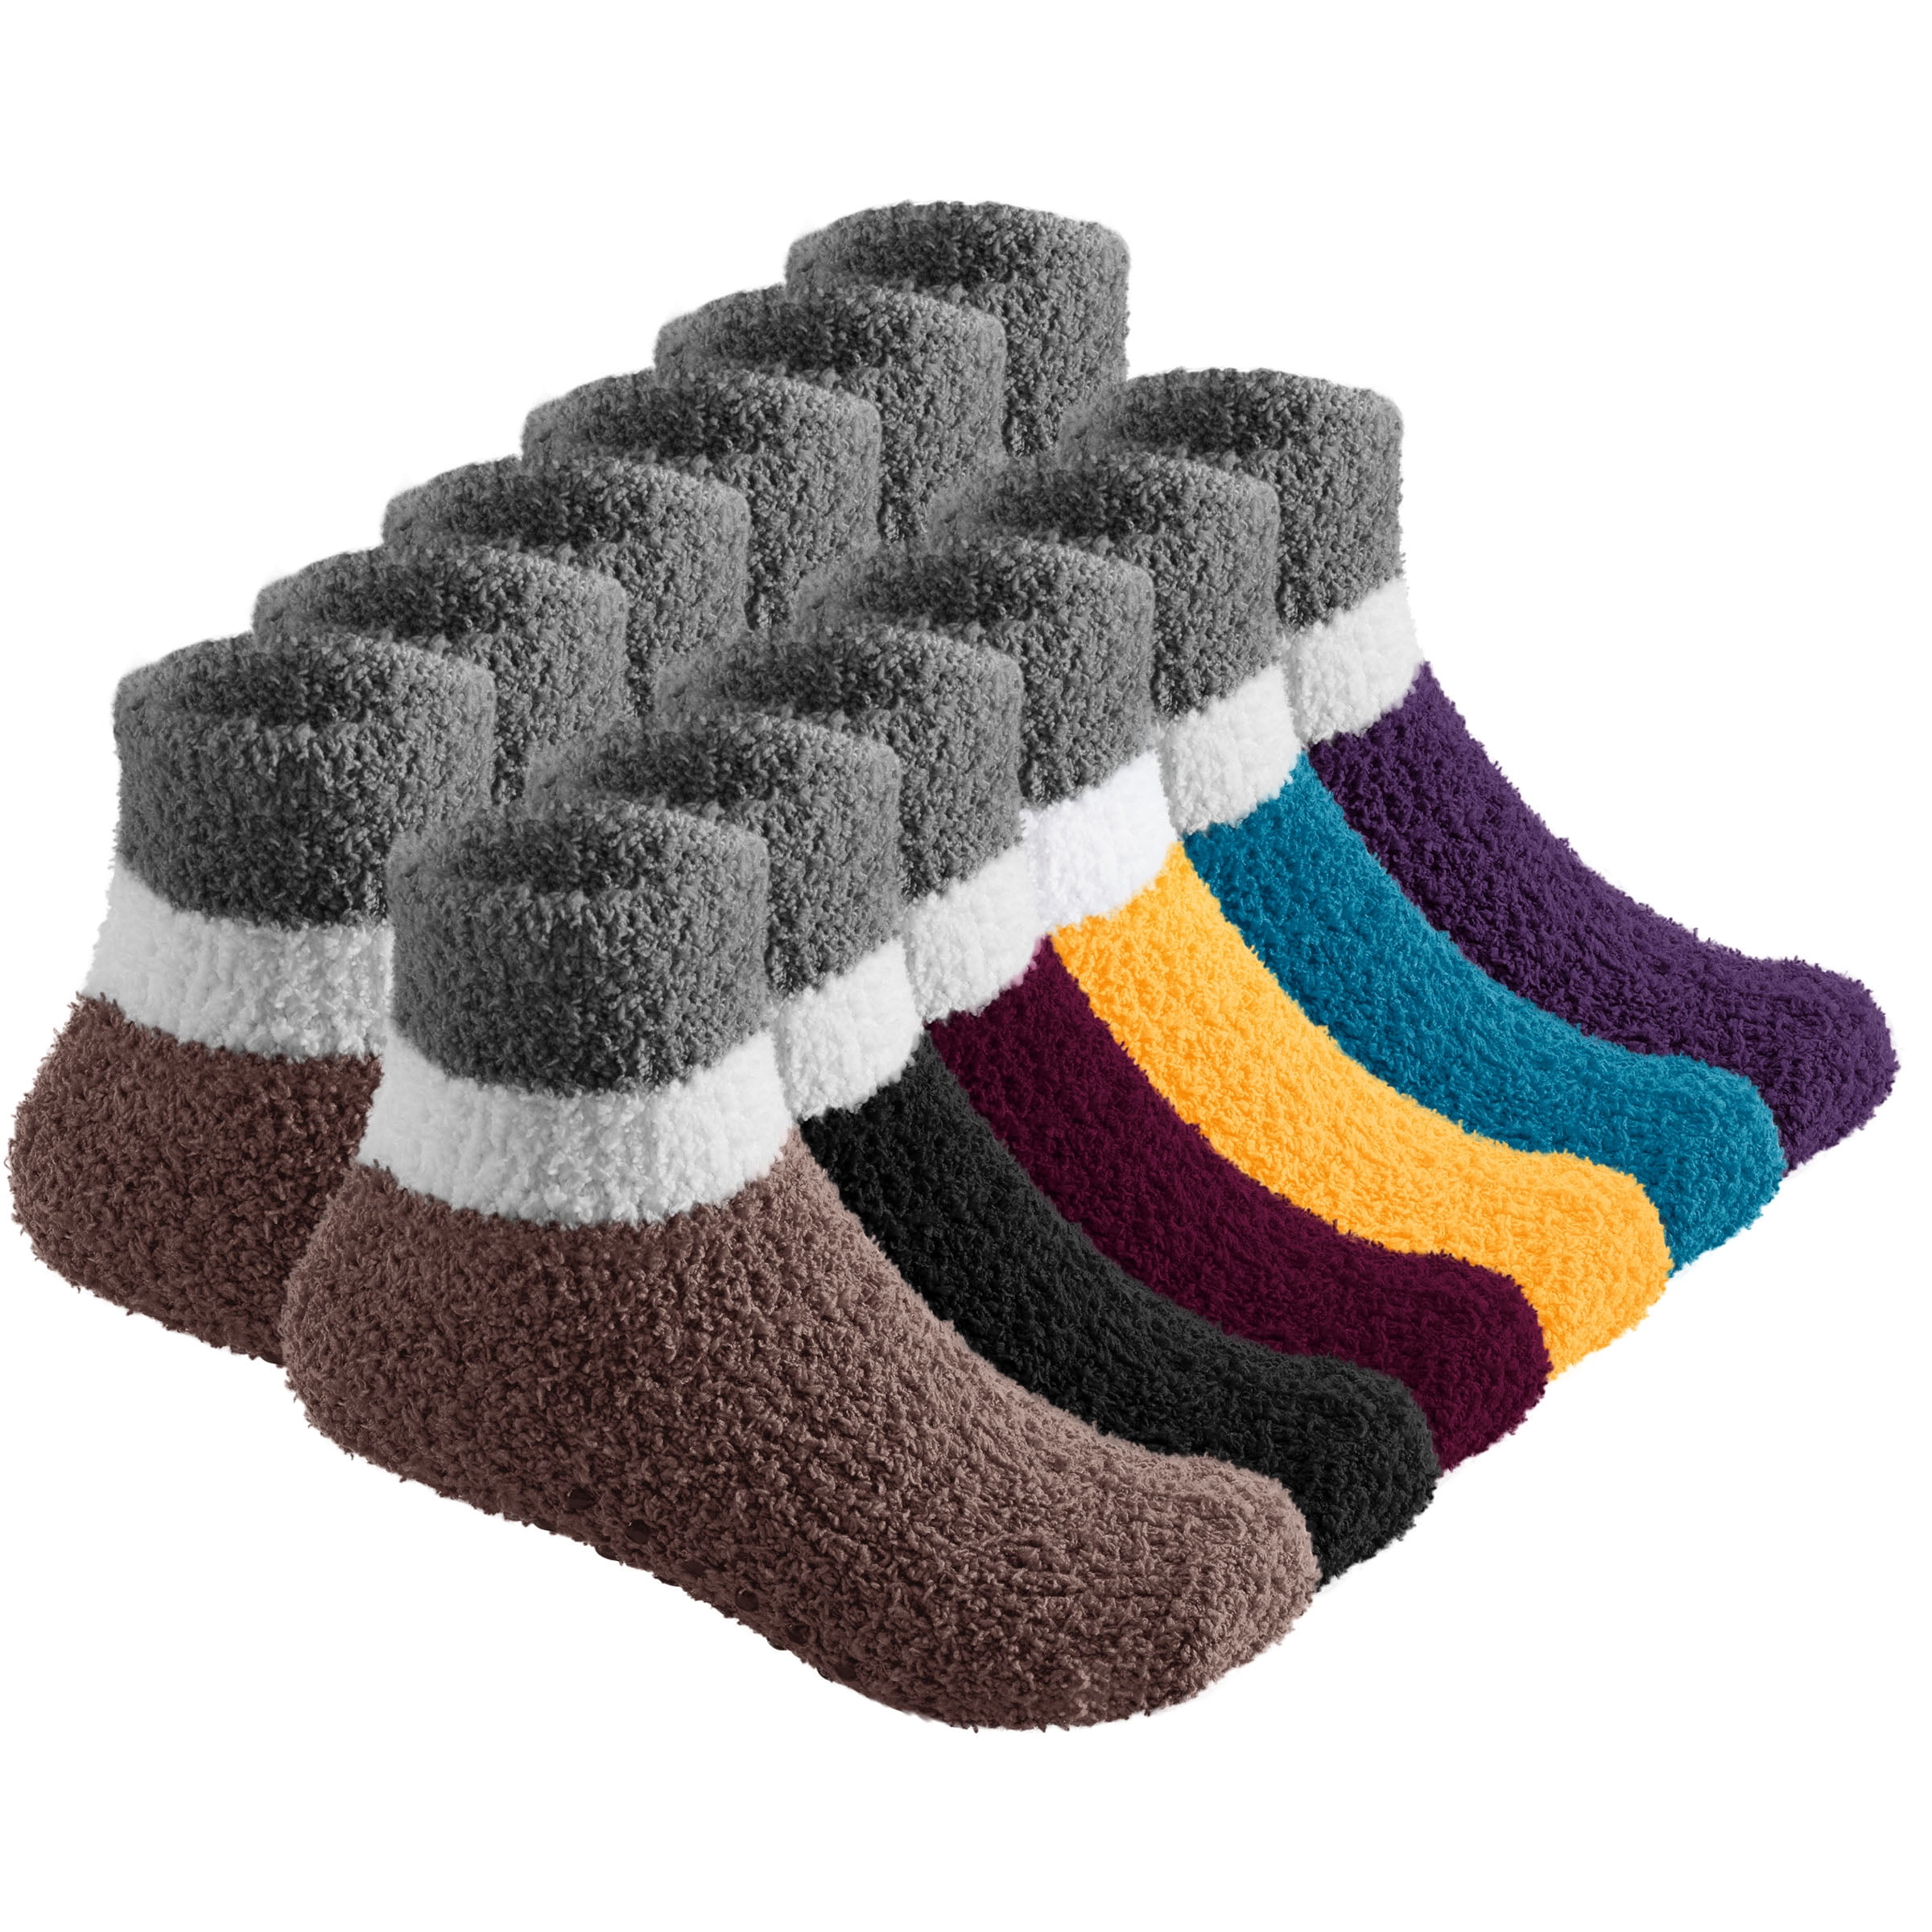 6 Pairs Warm Fuzzy Socks for Kids with Grippers - Non Skid Slipper Socks for Toddlers - Dark Two Tone 2-4 Yr Debra Weitzner - image 1 of 5